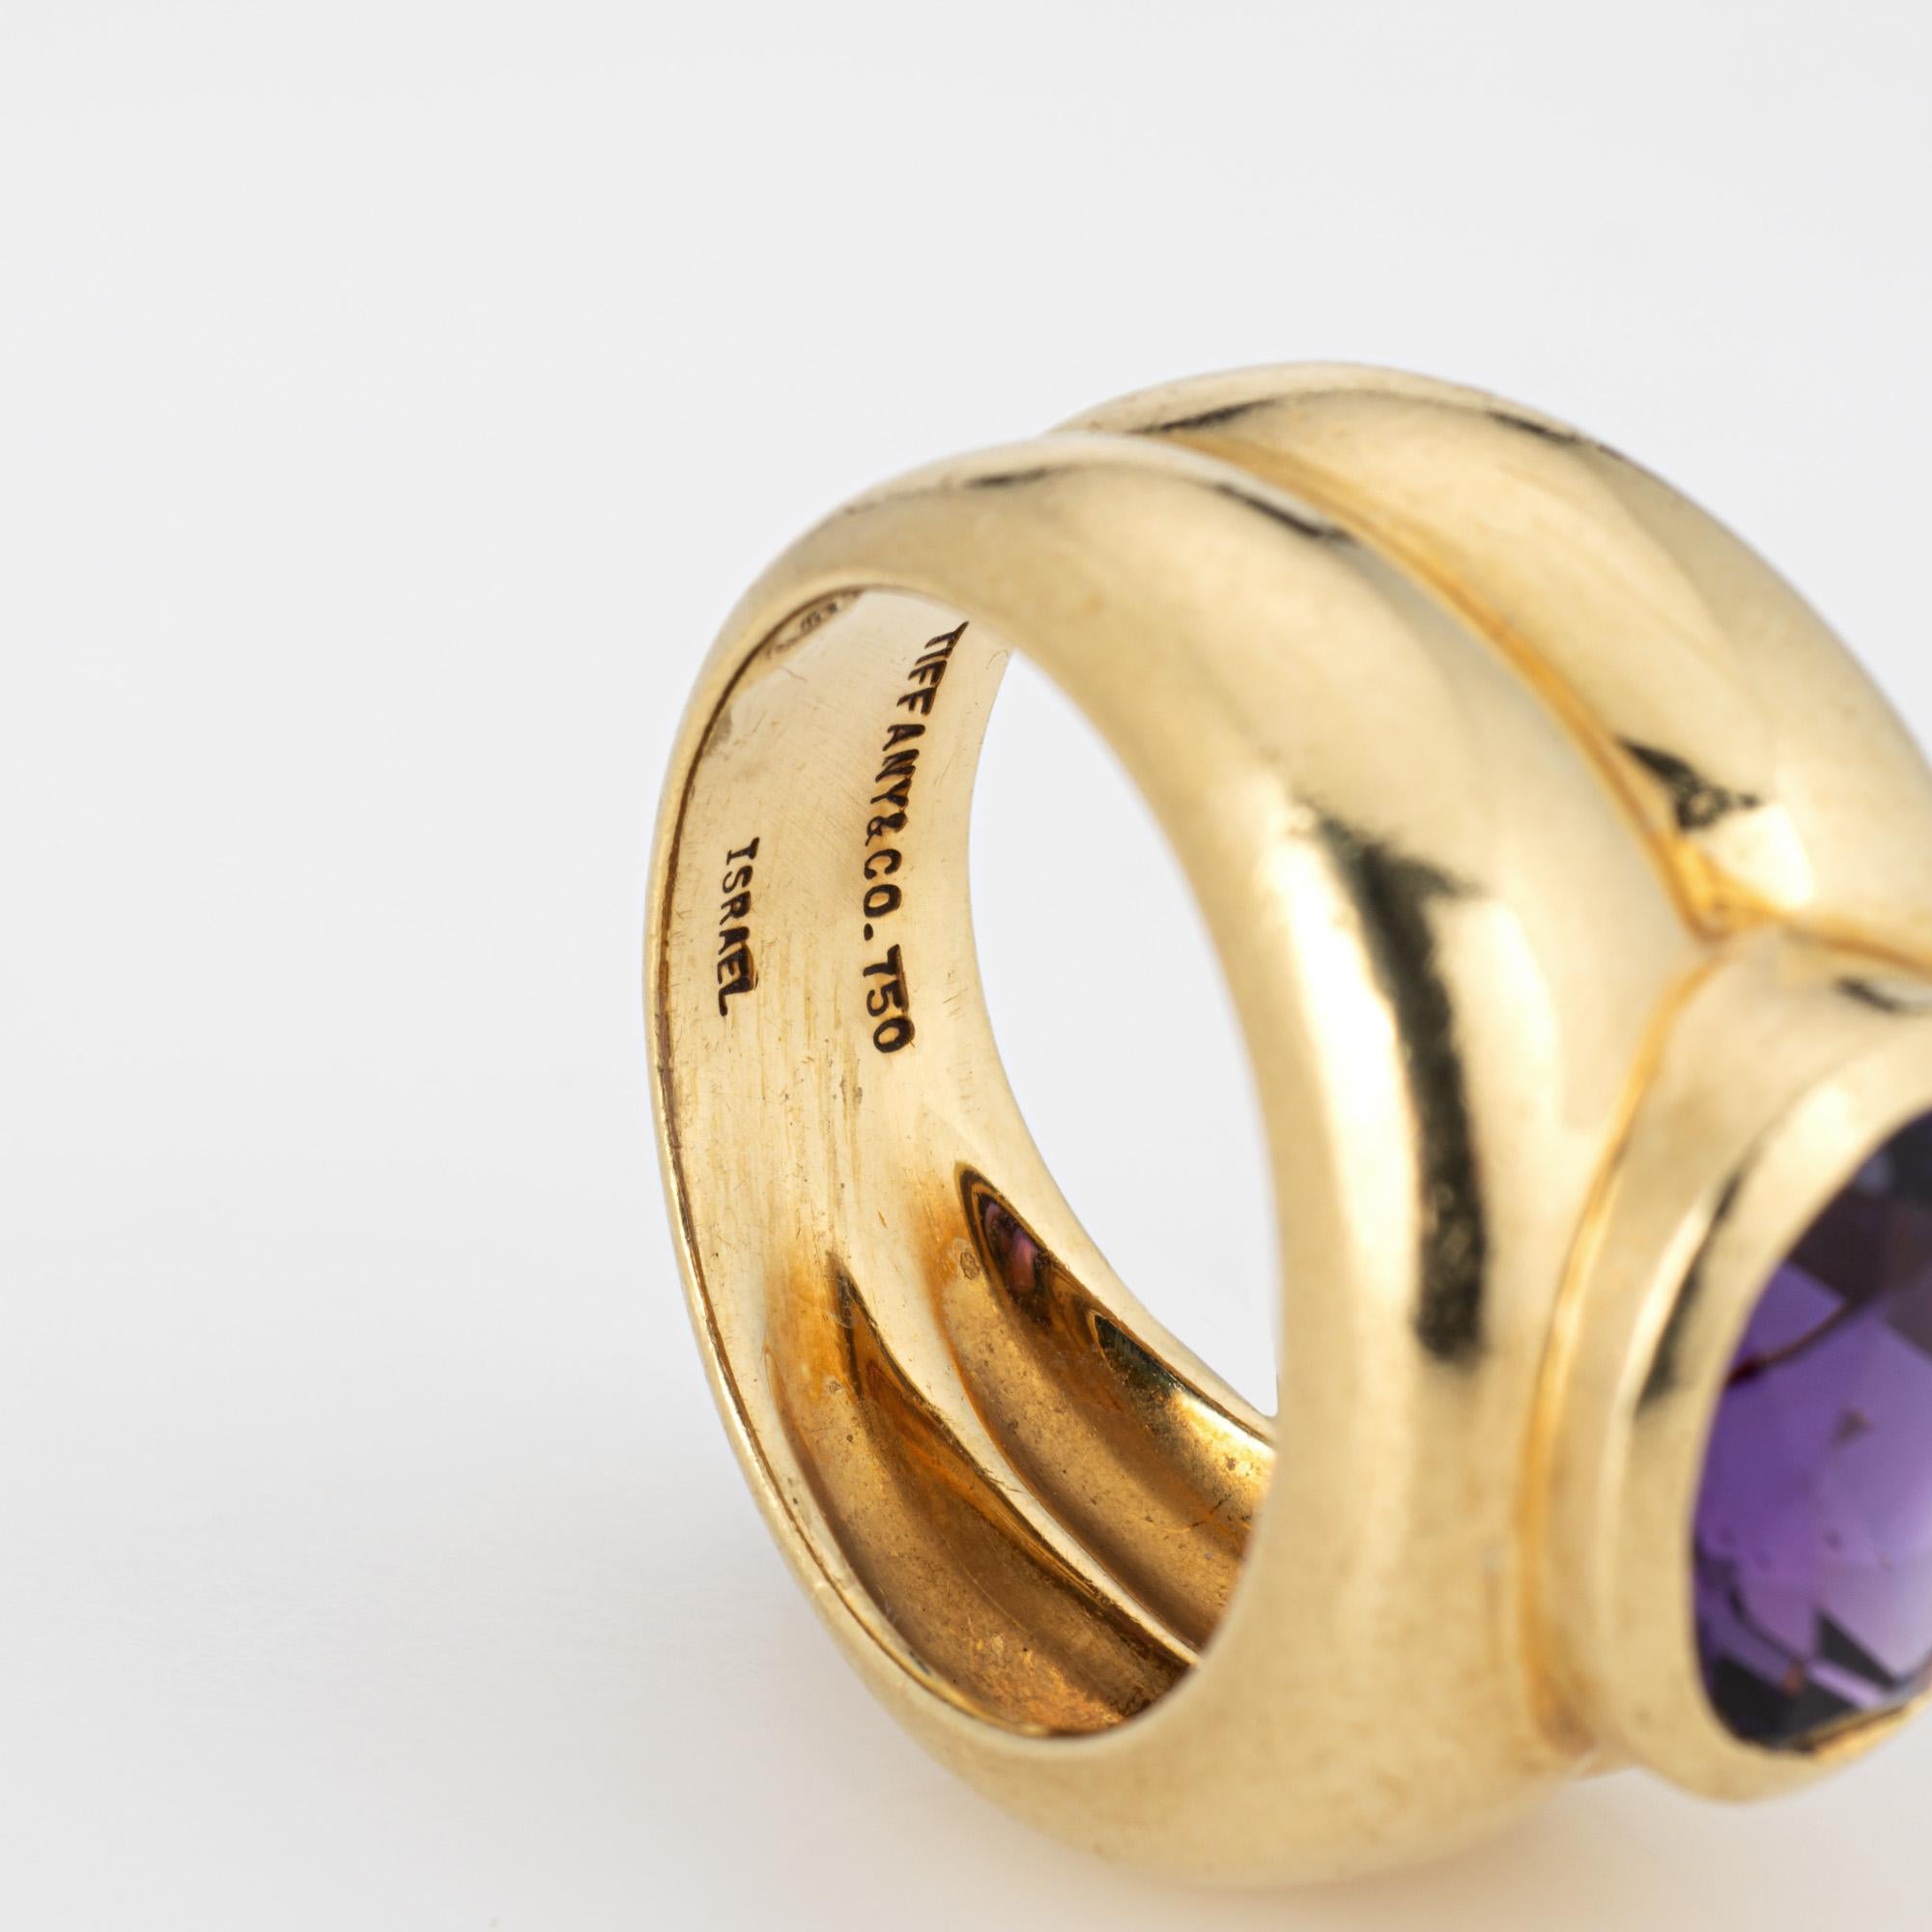 Vintage Tiffany & Co Amethyst Ring 18k Yellow Gold Sz 5.5 Band Signed Jewelry For Sale 1